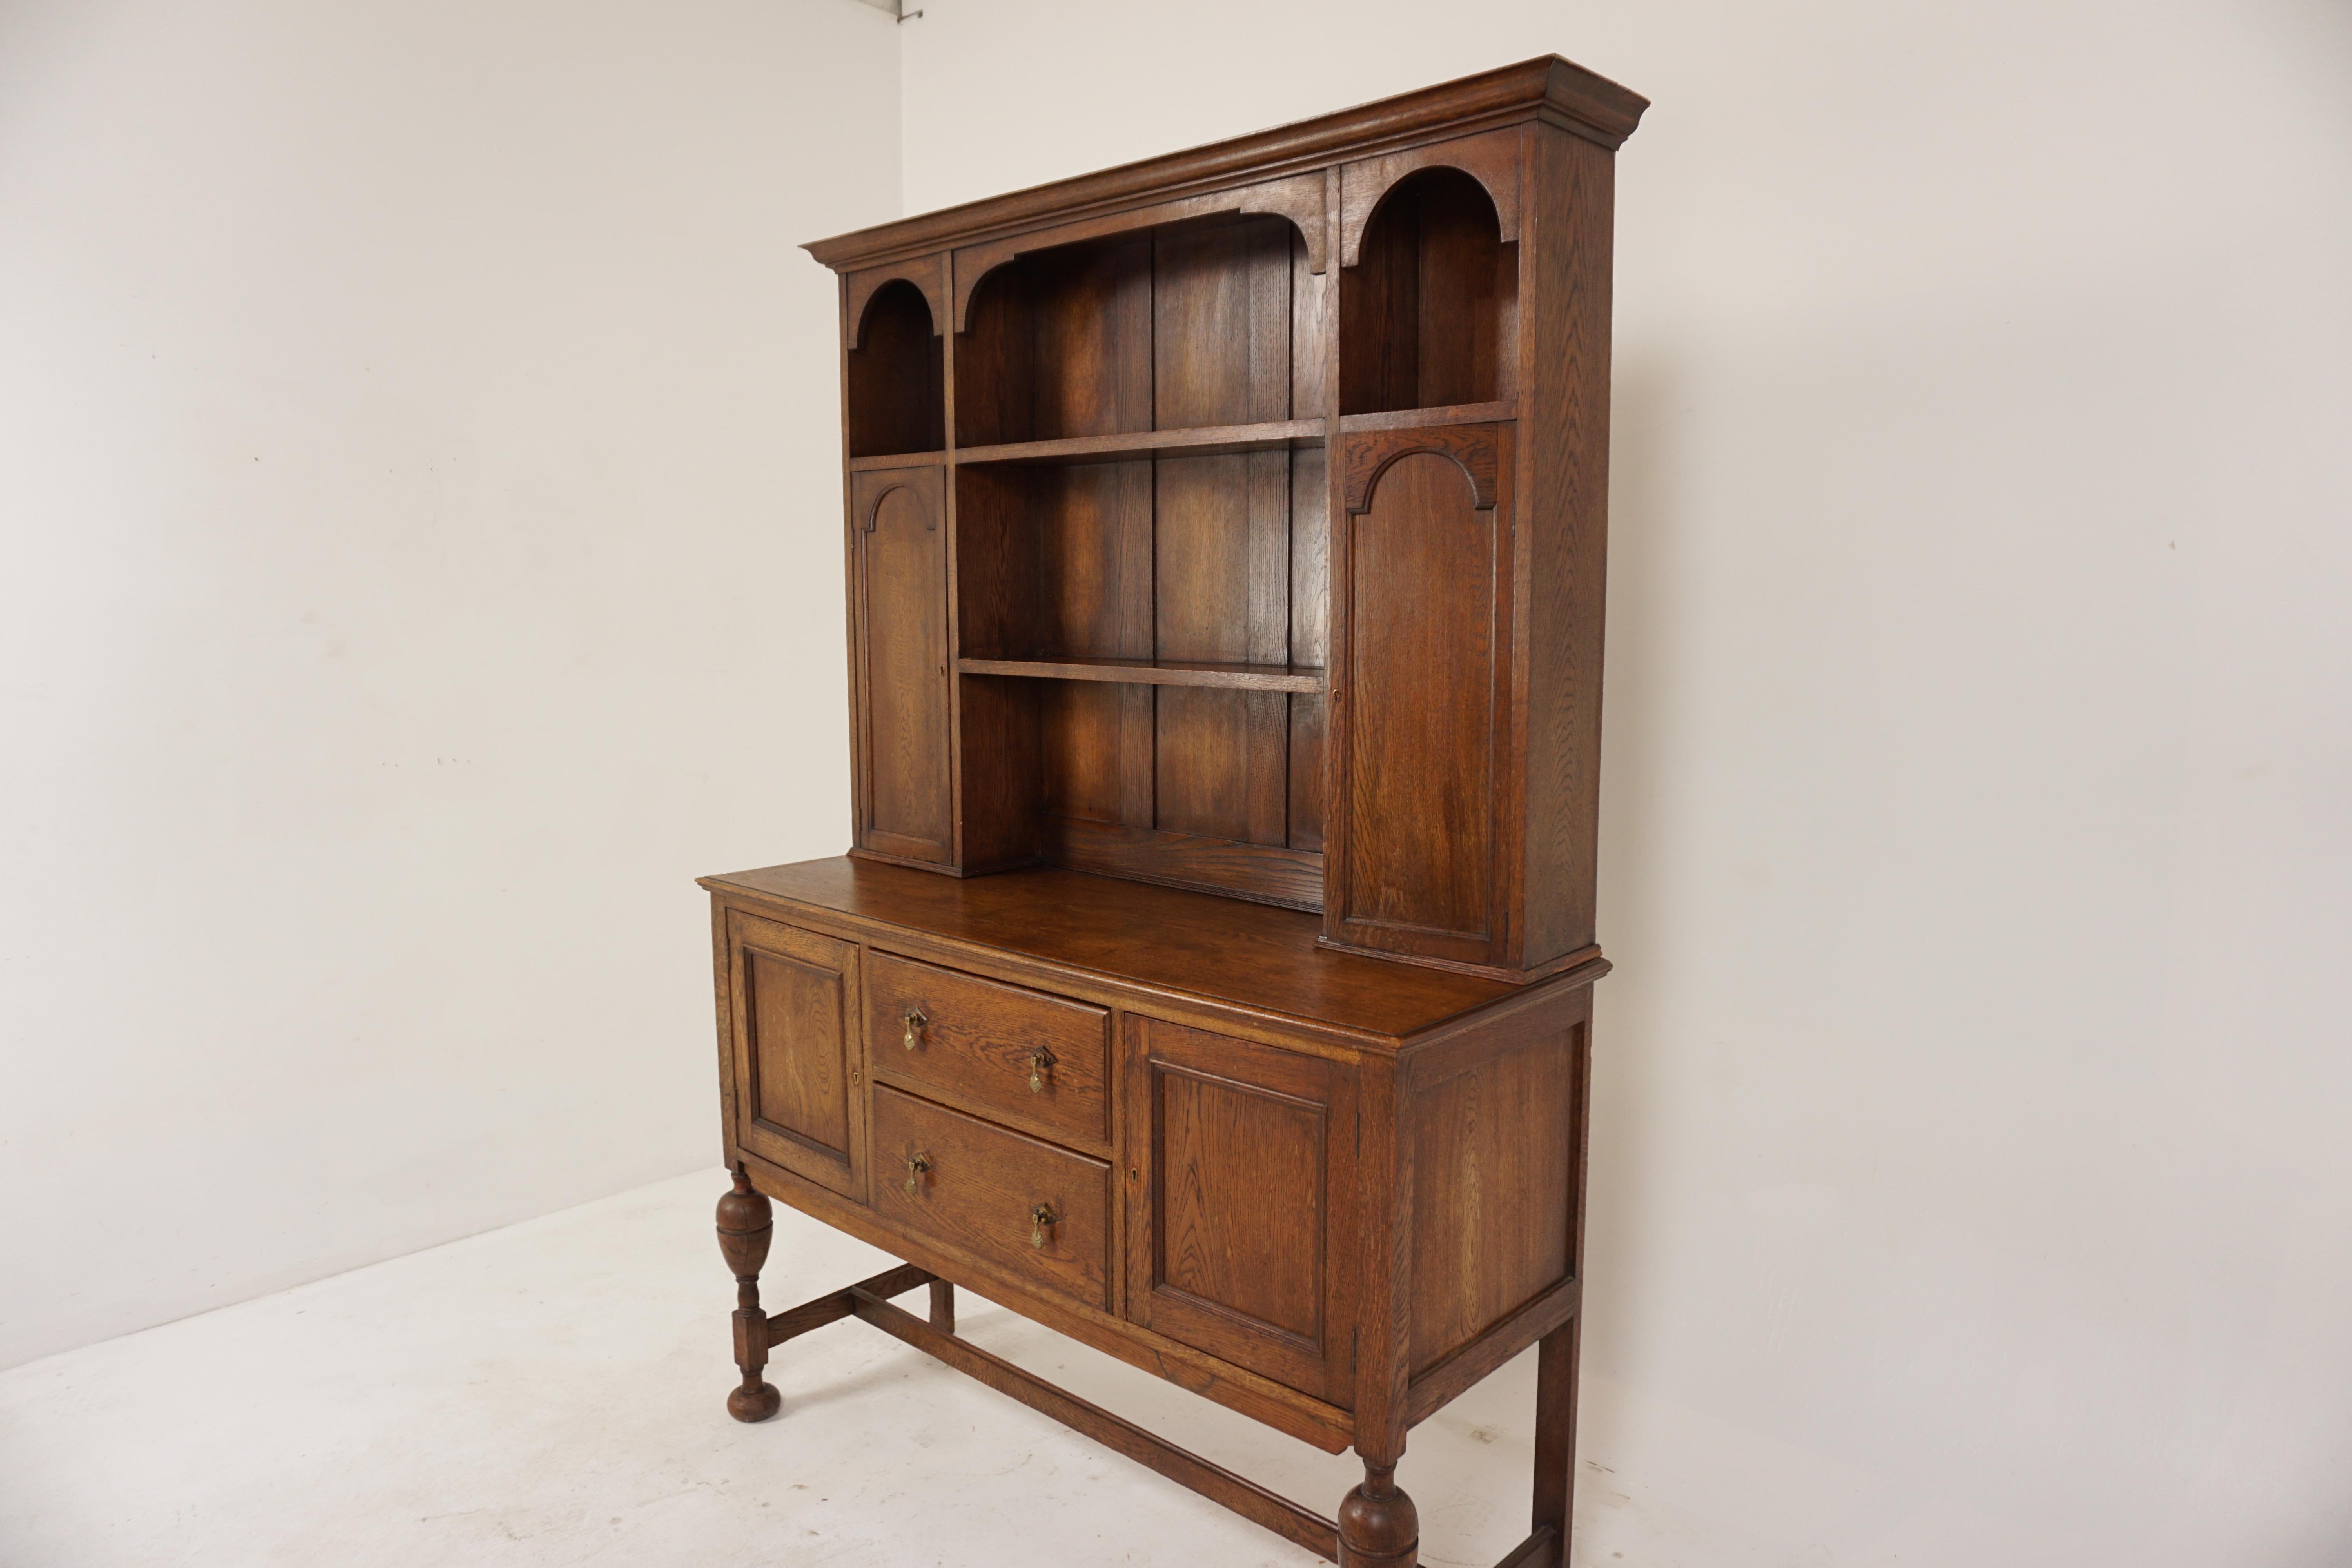 Oak welsh dresser, buffet + hutch, Scotland 1920, B602

Scotland 1920
Solid Oak
Original finish
Overhang Cornice on Top
Four plate rack shelves
Pair of panelled cupboard doors open to reveal single shelf
The base with two dovetailed drawers